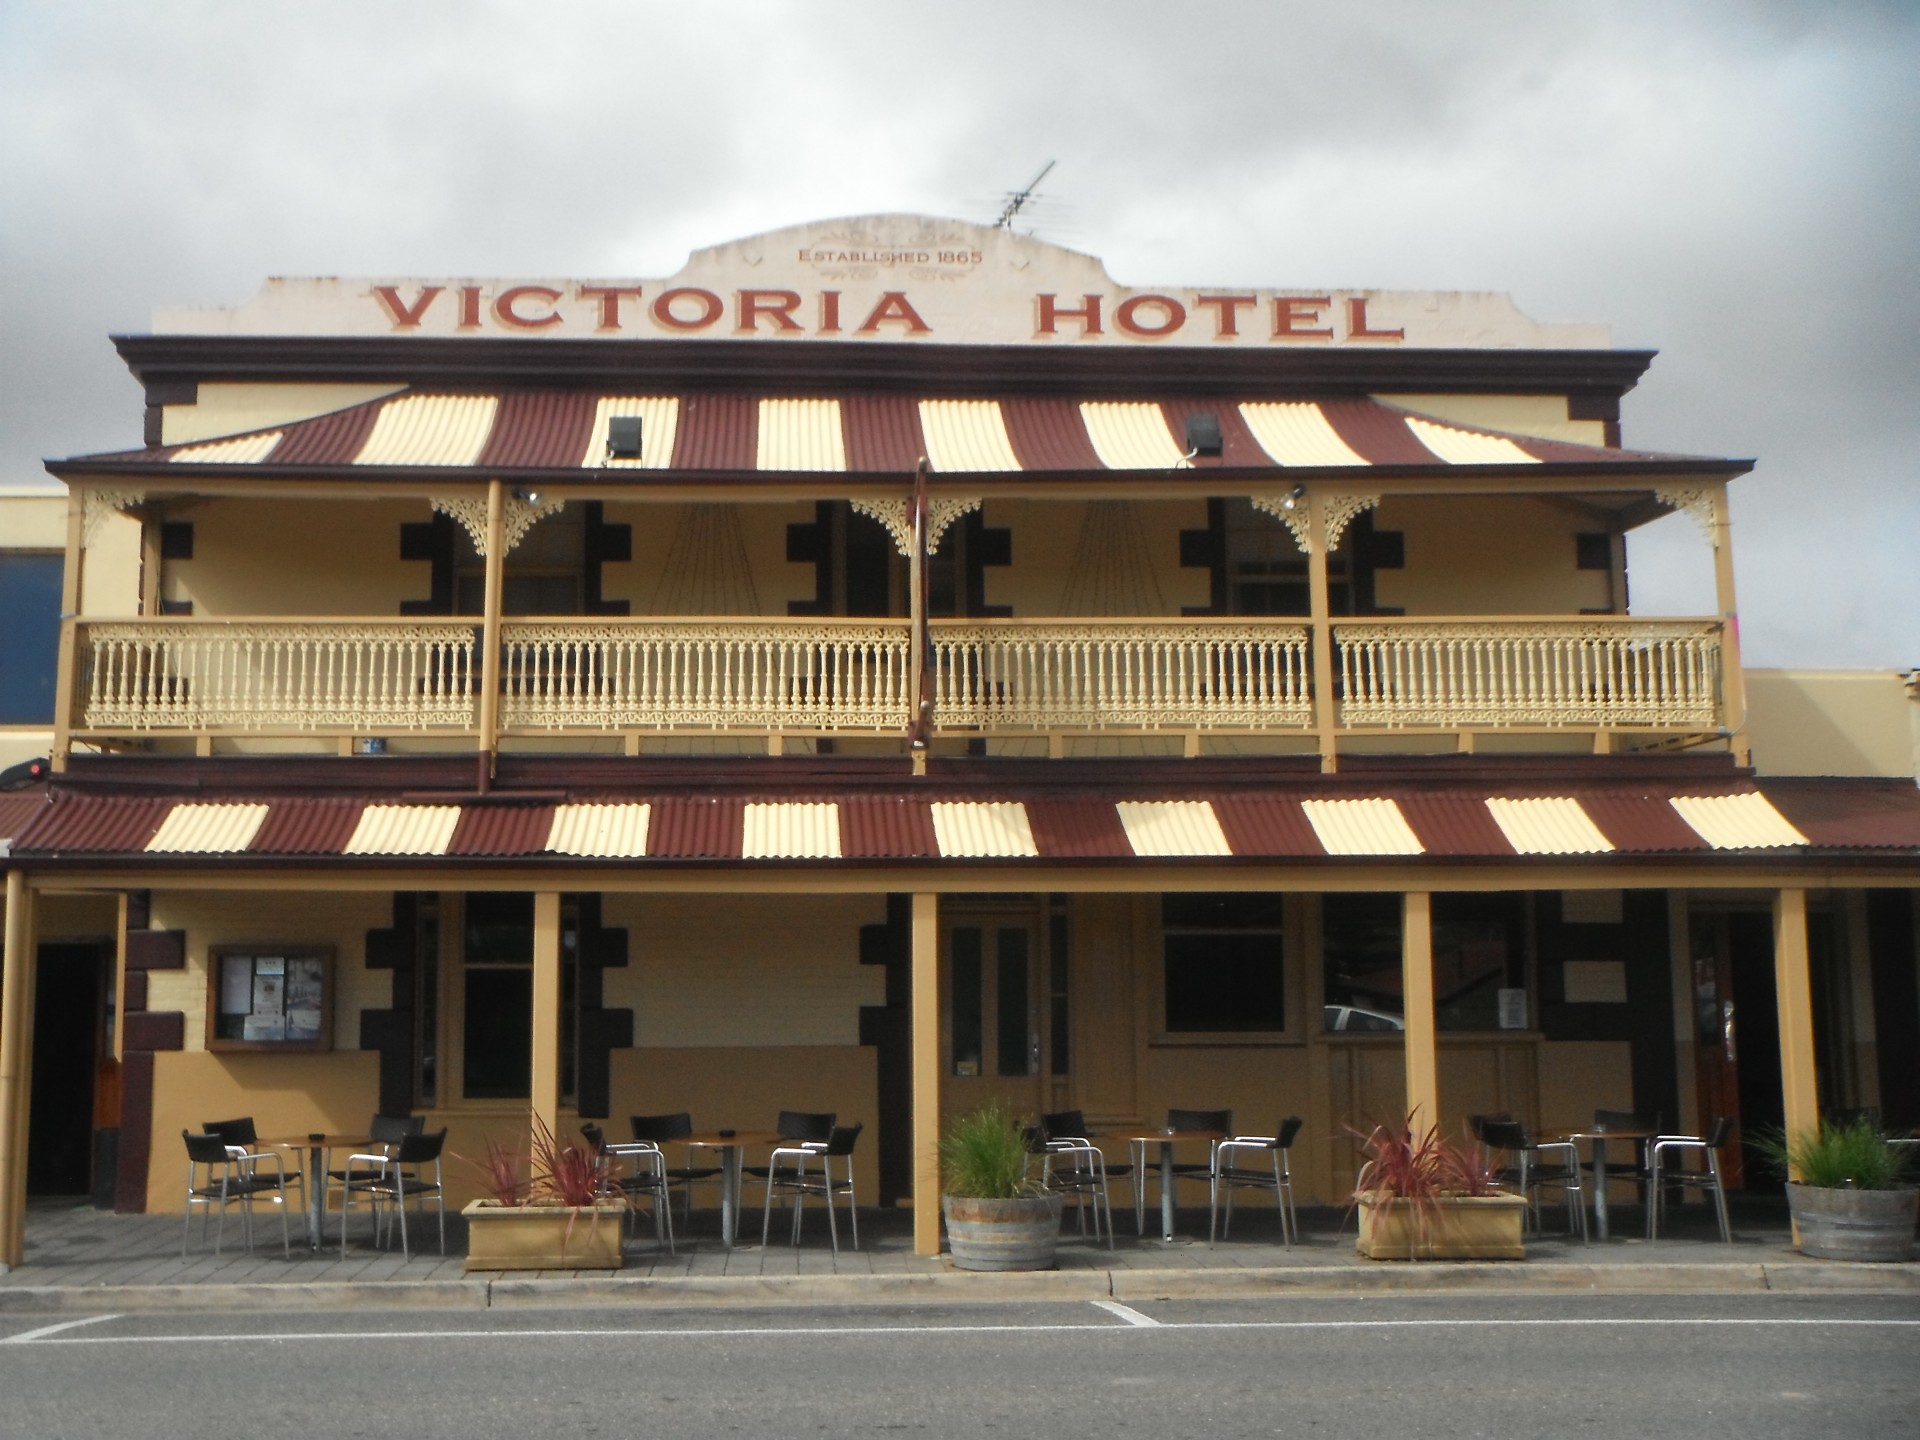 One of many historic hotels (or pubs) in country towns